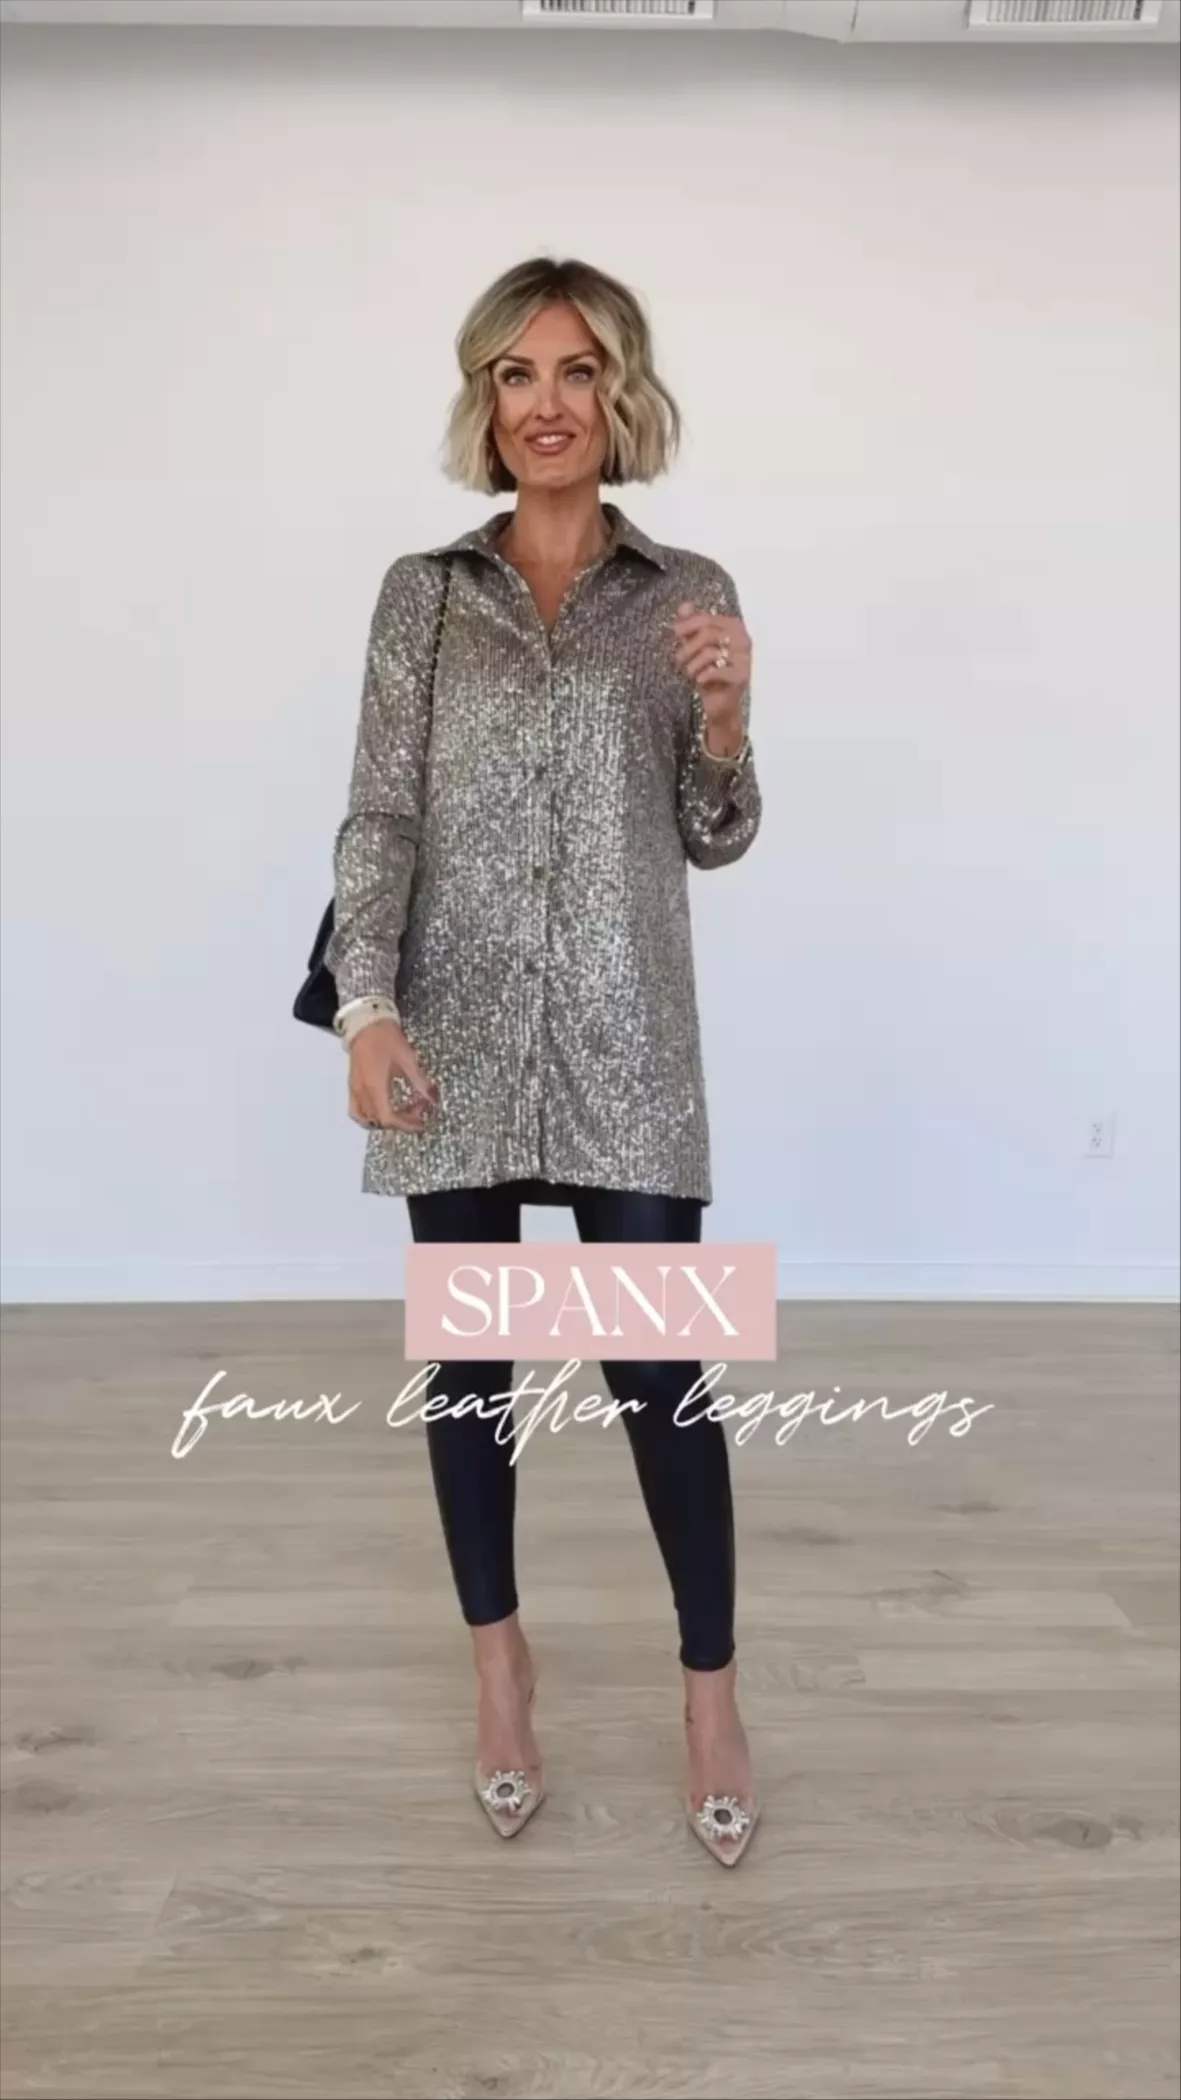 Shopping Designer with  - Loverly Grey